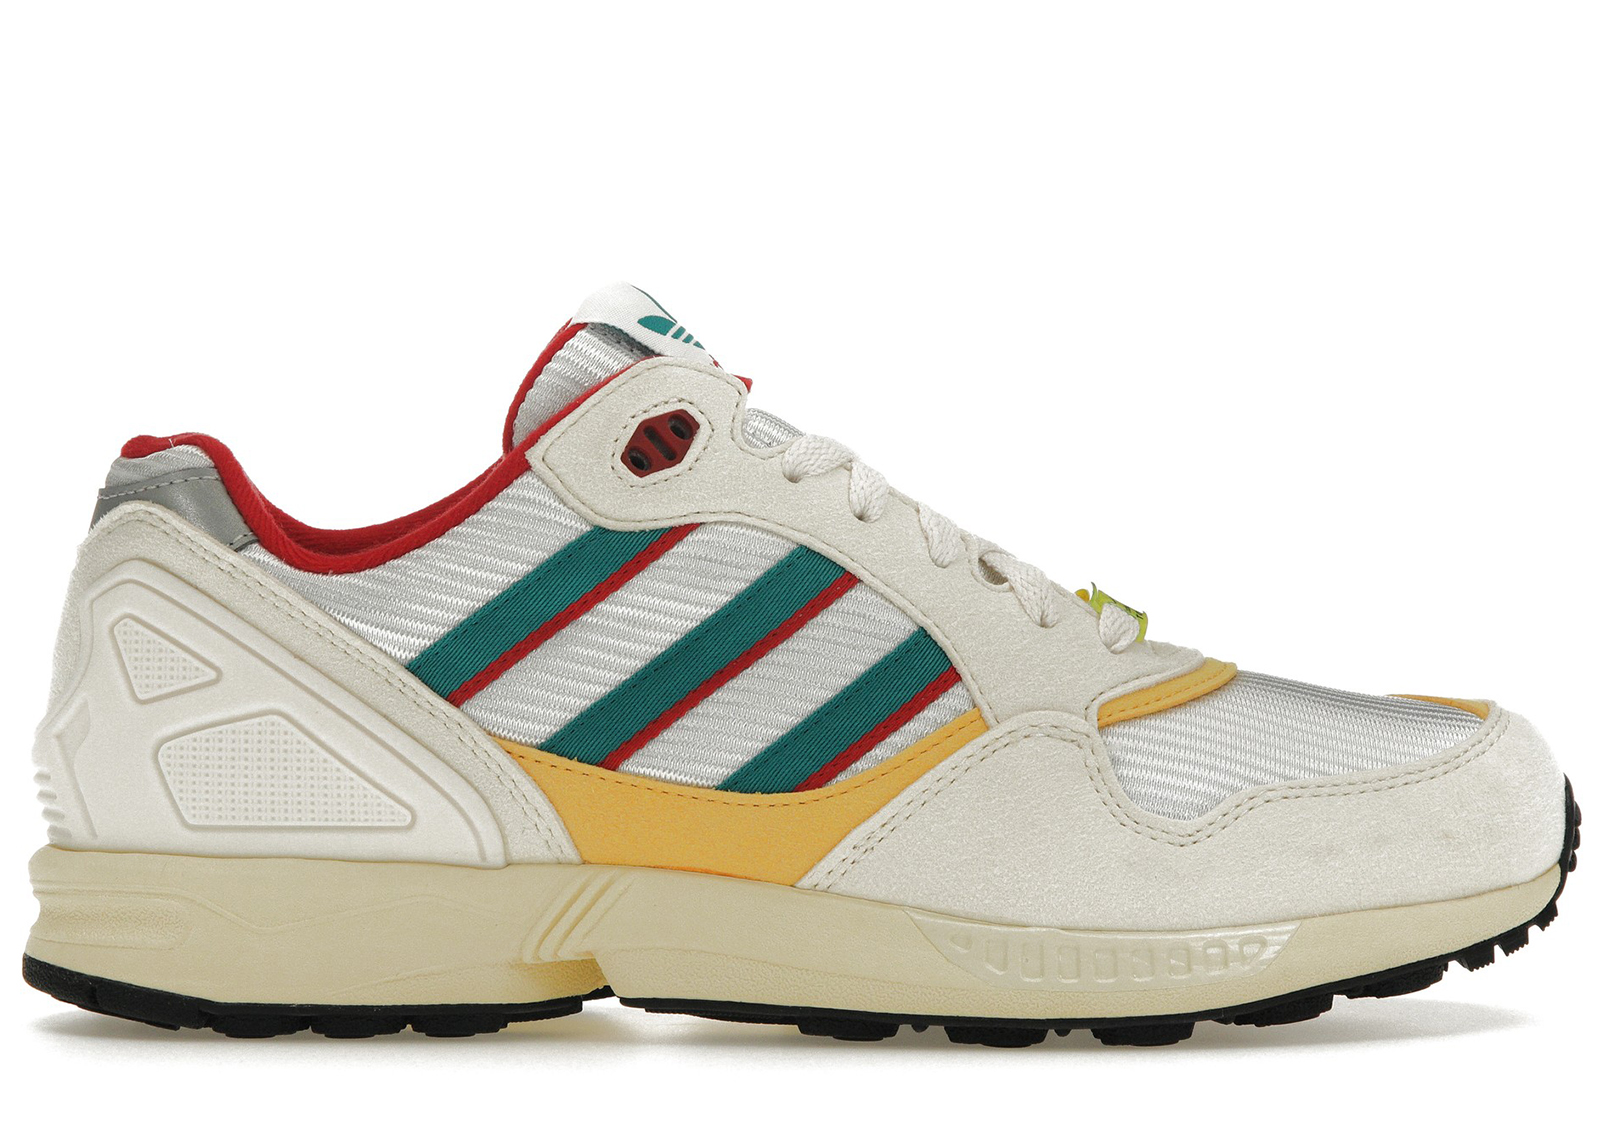 adidas ZX 9000 30 Years of Torsion Men's - FU8403 - US